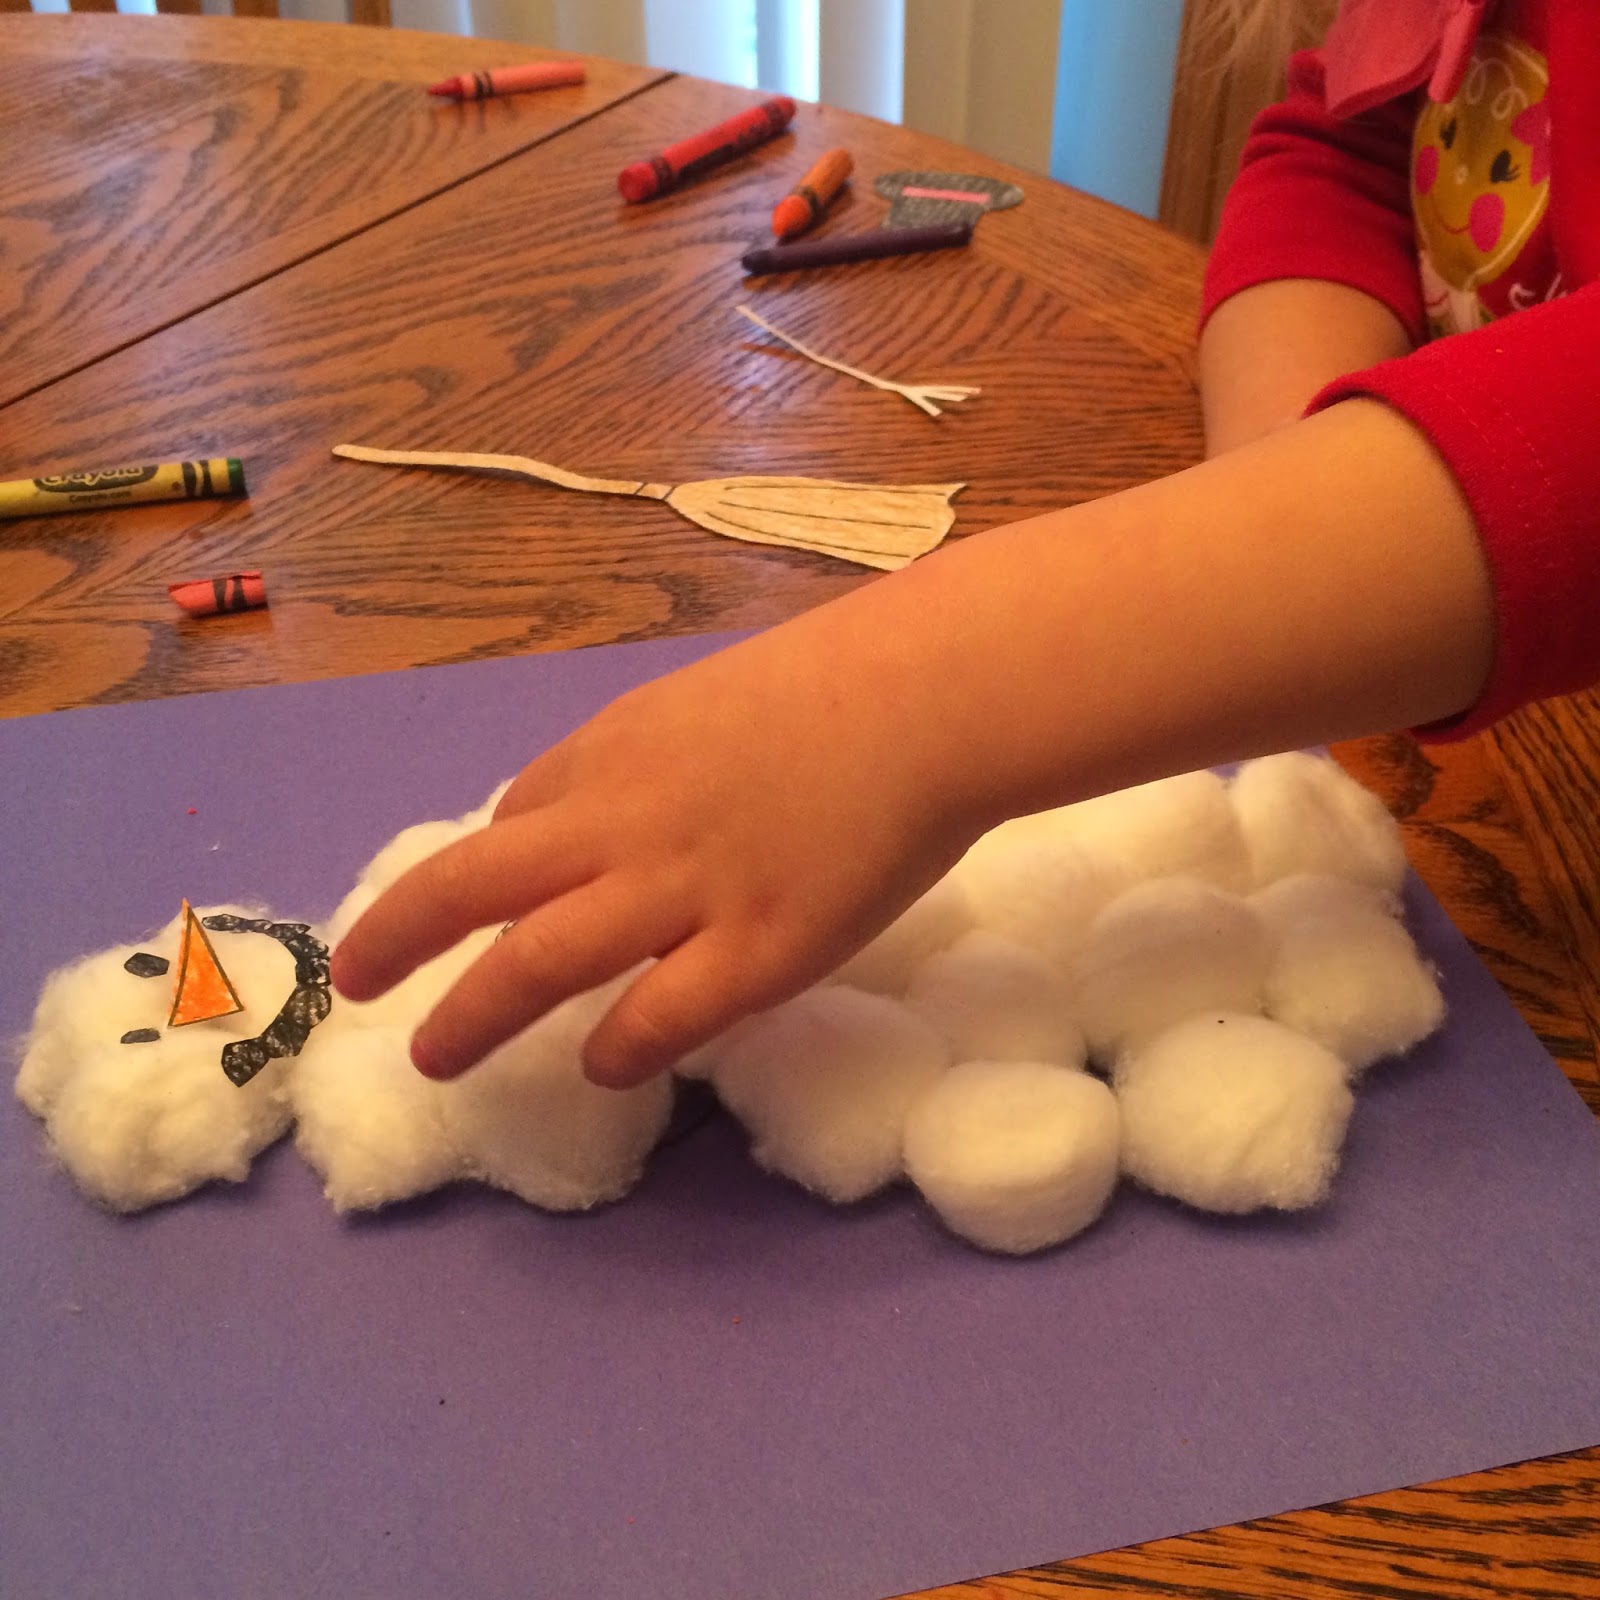 Speech Therapy Fun: Do You Want To Build A Snowman?